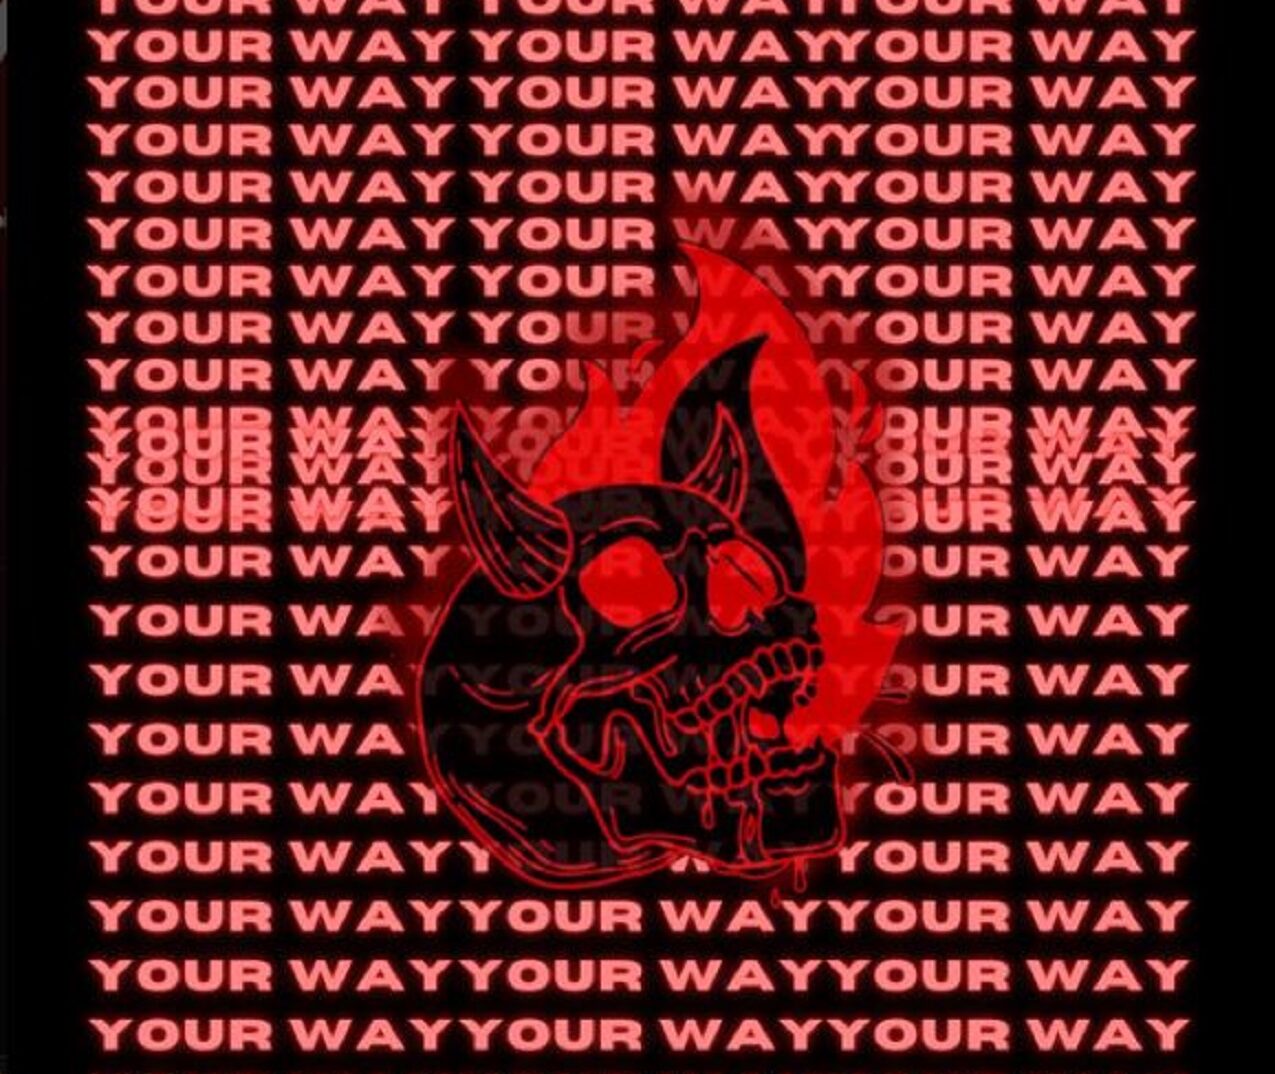 Playboiruto and Stl’sown – Your Way – new